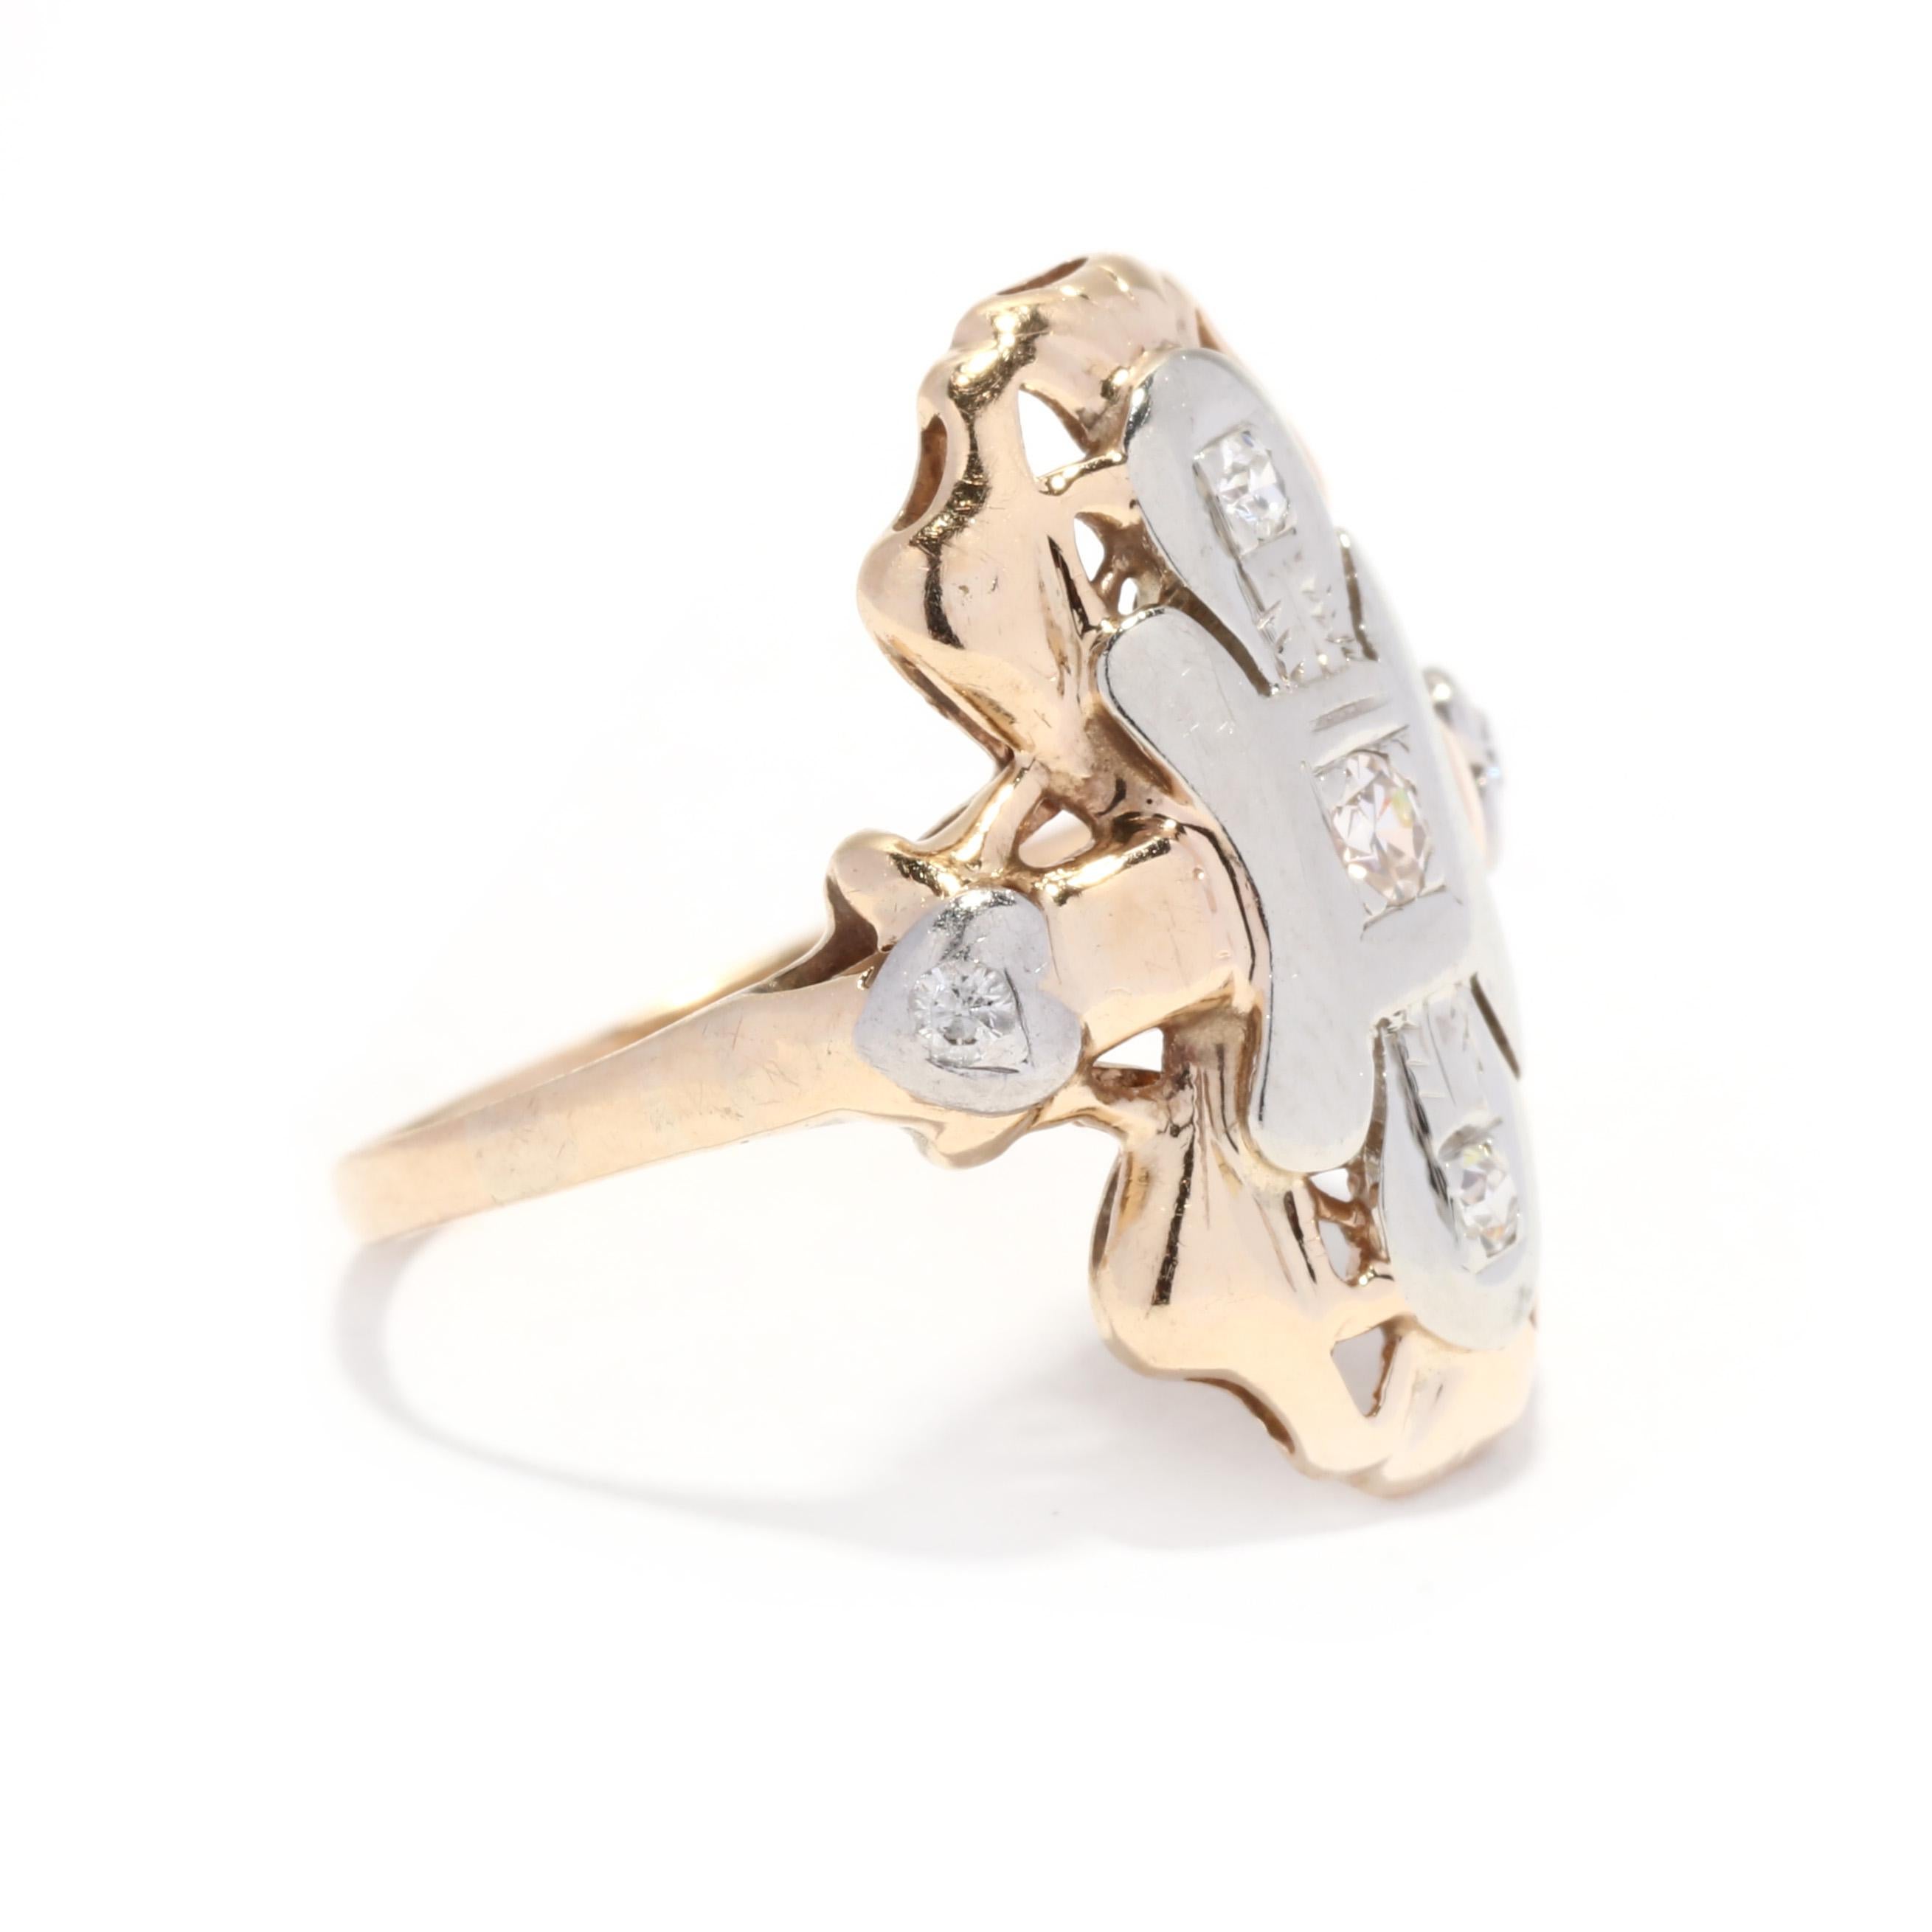 A retro 10 kart bi color gold diamond long dinner ring. This statement ring features a vertical bow shape in bi color gold, set with single cut round diamonds weighing approximately .07 total carats and with a tapered band.

Stones:
- diamonds, 5